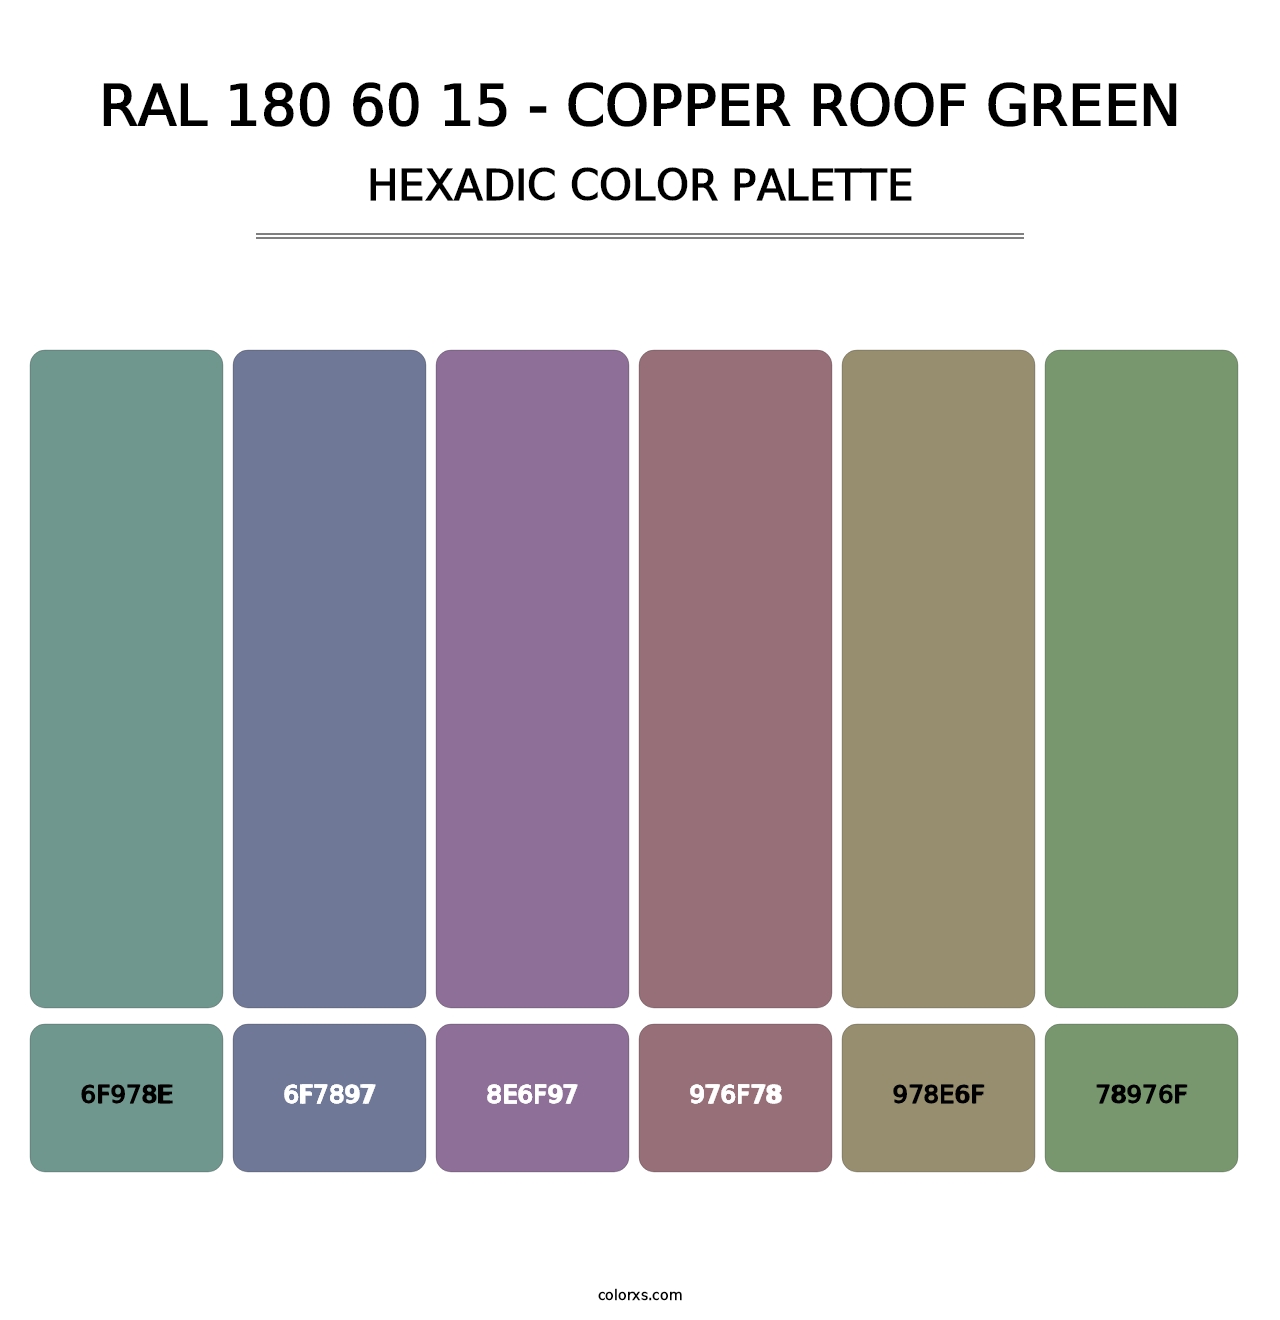 RAL 180 60 15 - Copper Roof Green - Hexadic Color Palette